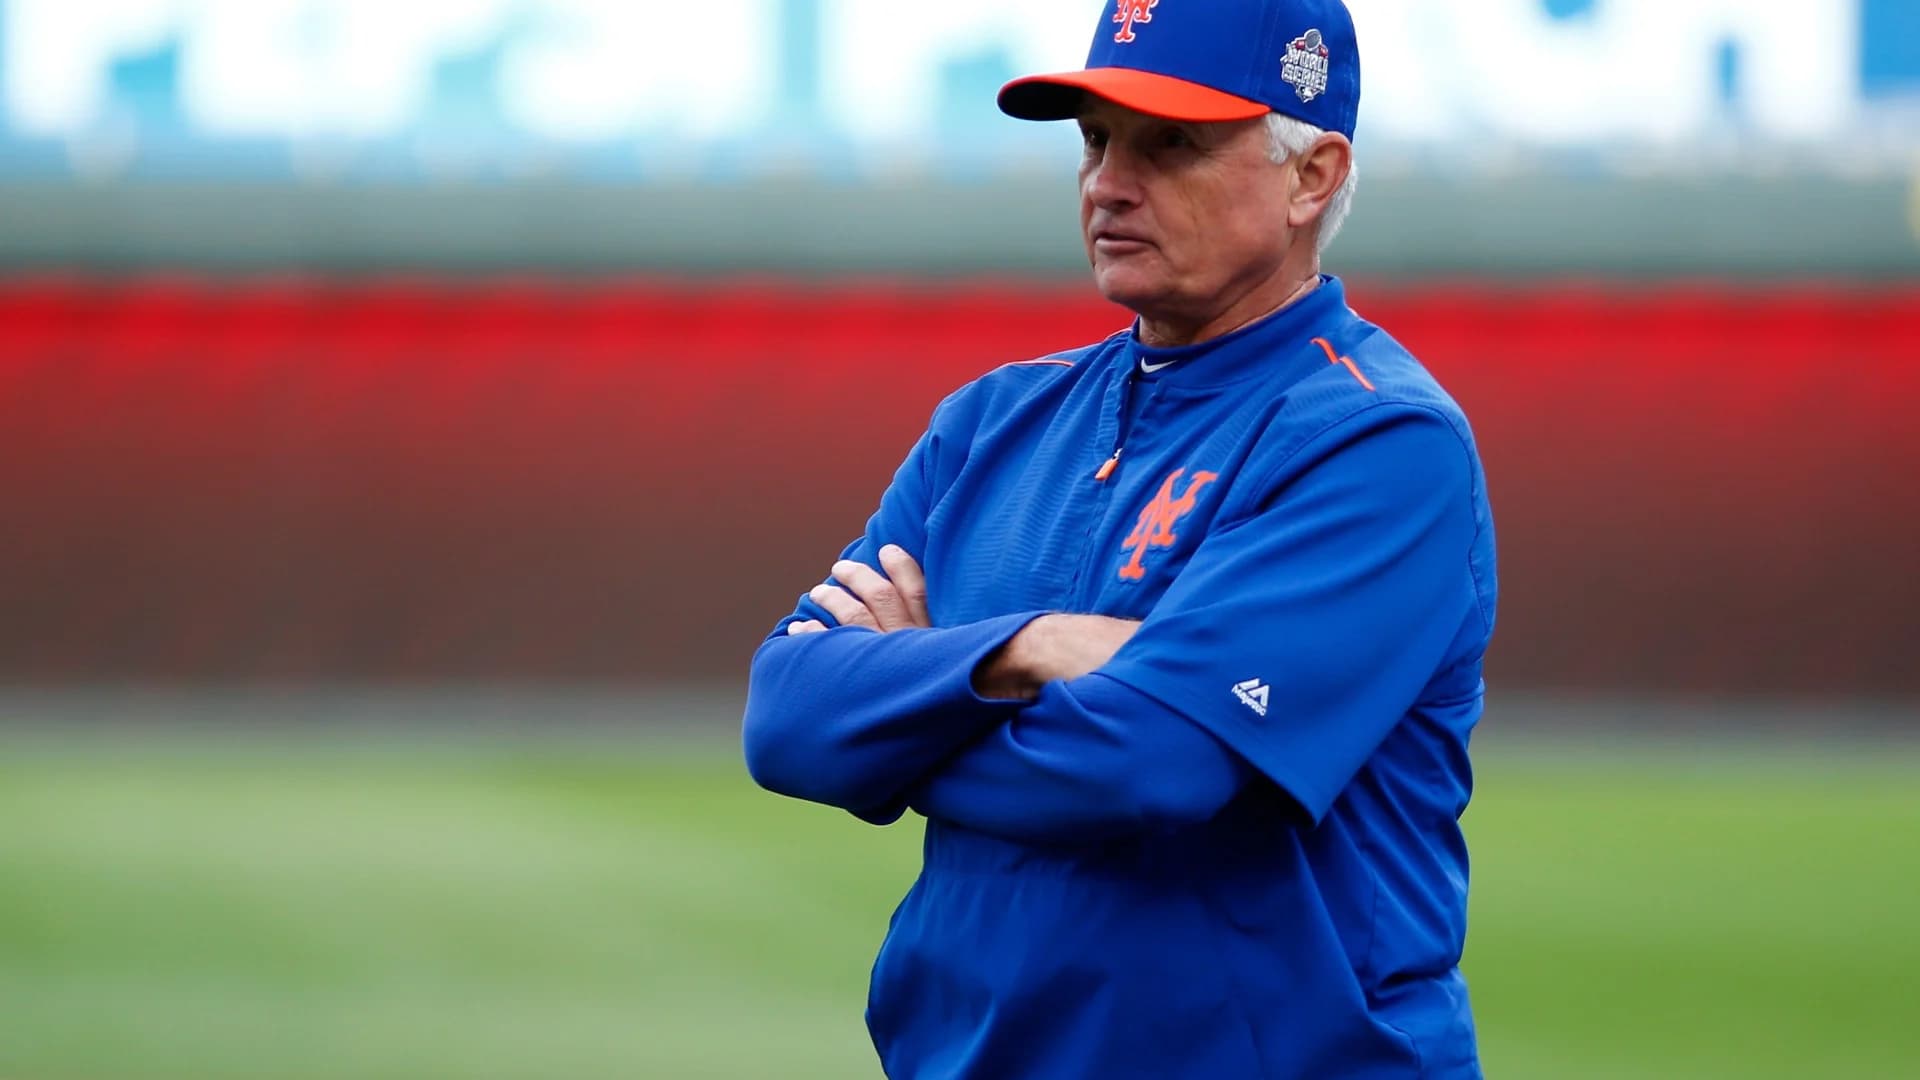 Terry Collins stepping down as Mets manager